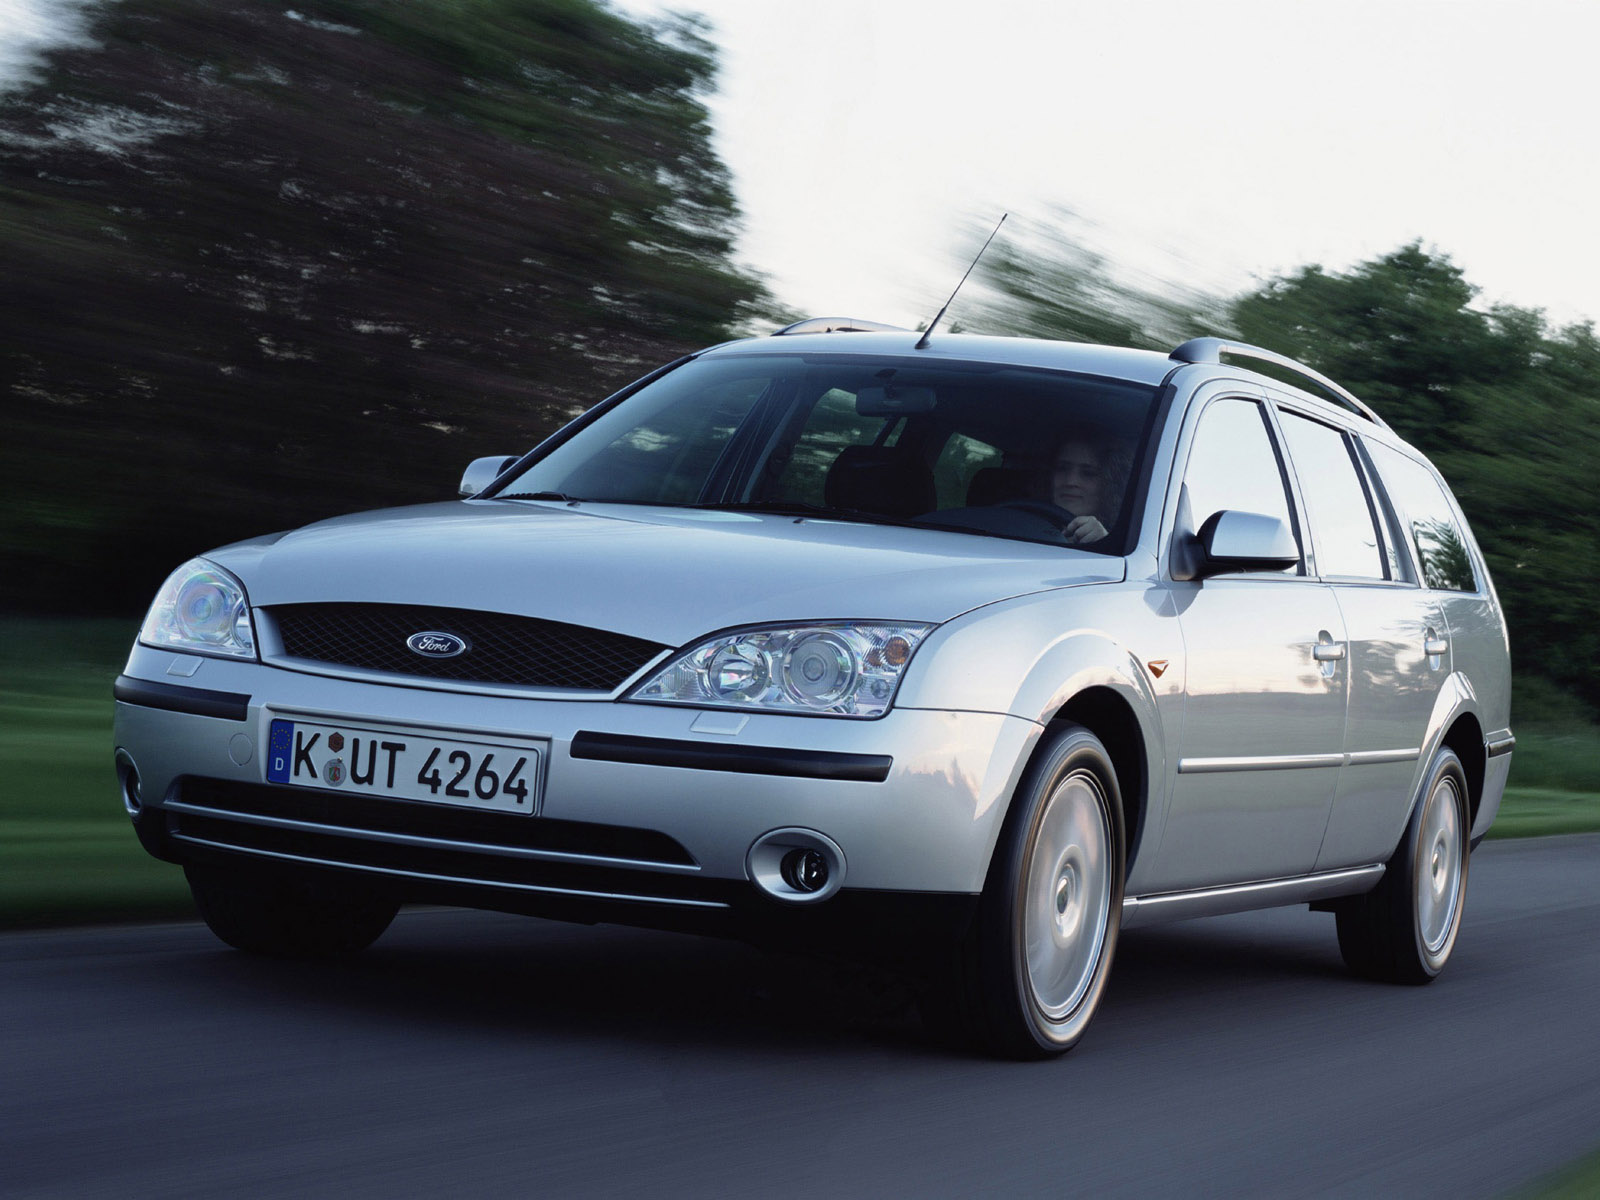 Ford Mondeo Review, Amazing Pictures and Images Look at the car